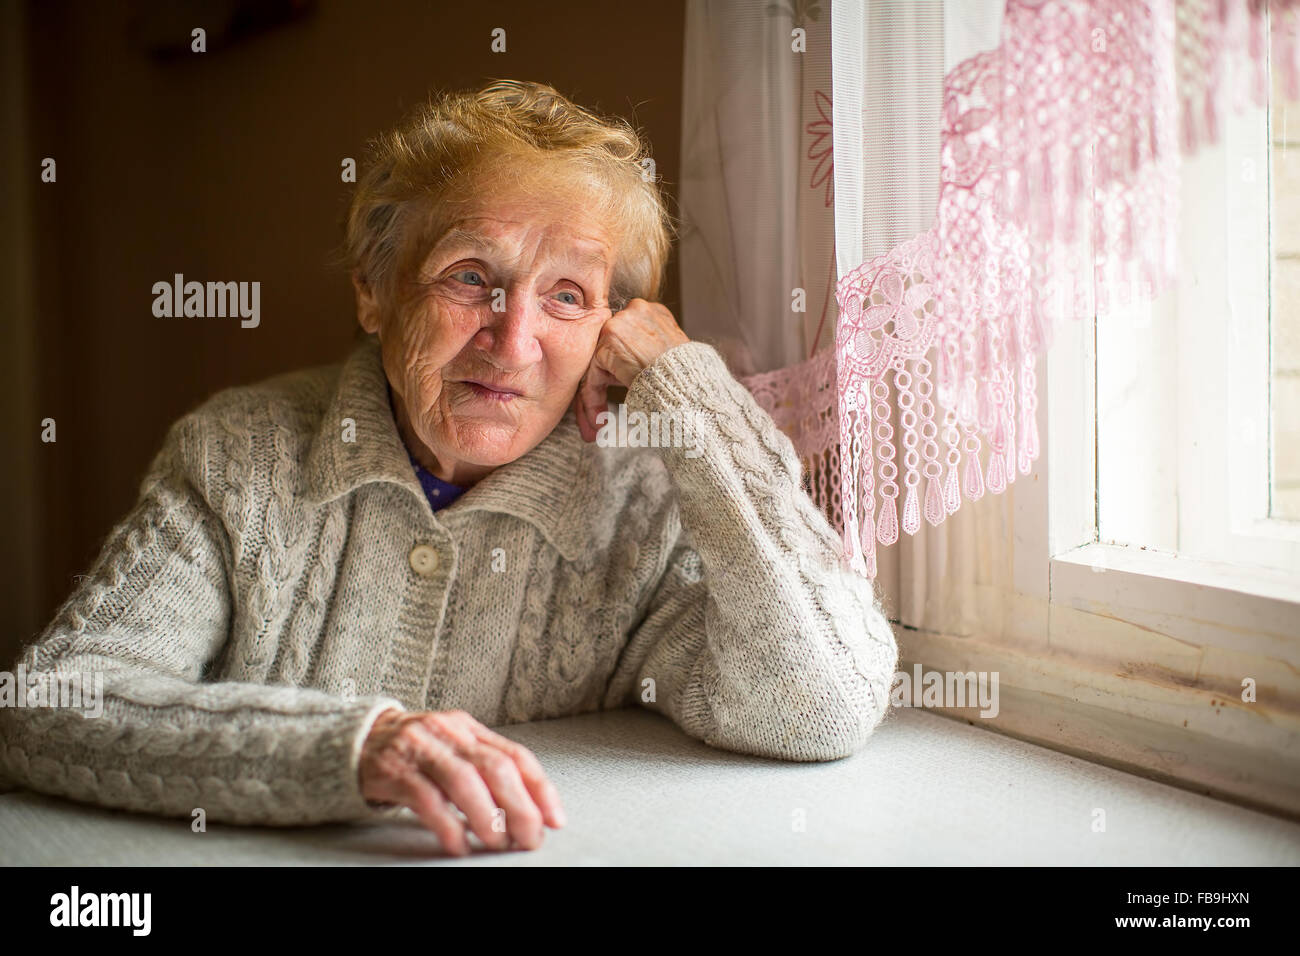 An elderly woman sits near the window in house. Stock Photo